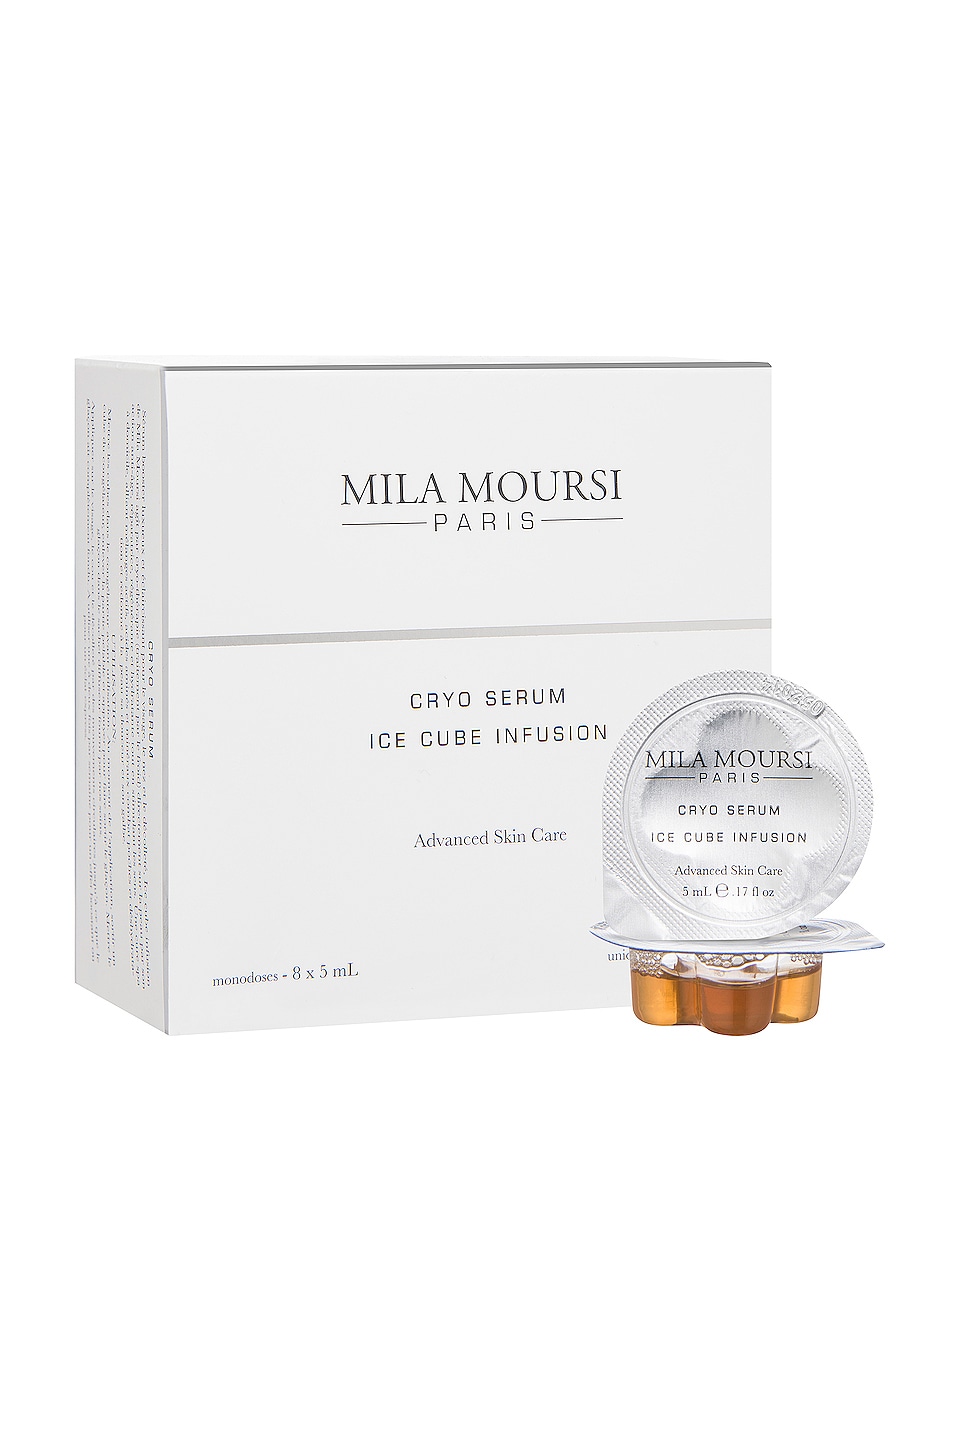 Mila Moursi Cryo Serum Ice Cube Infusion In N,a